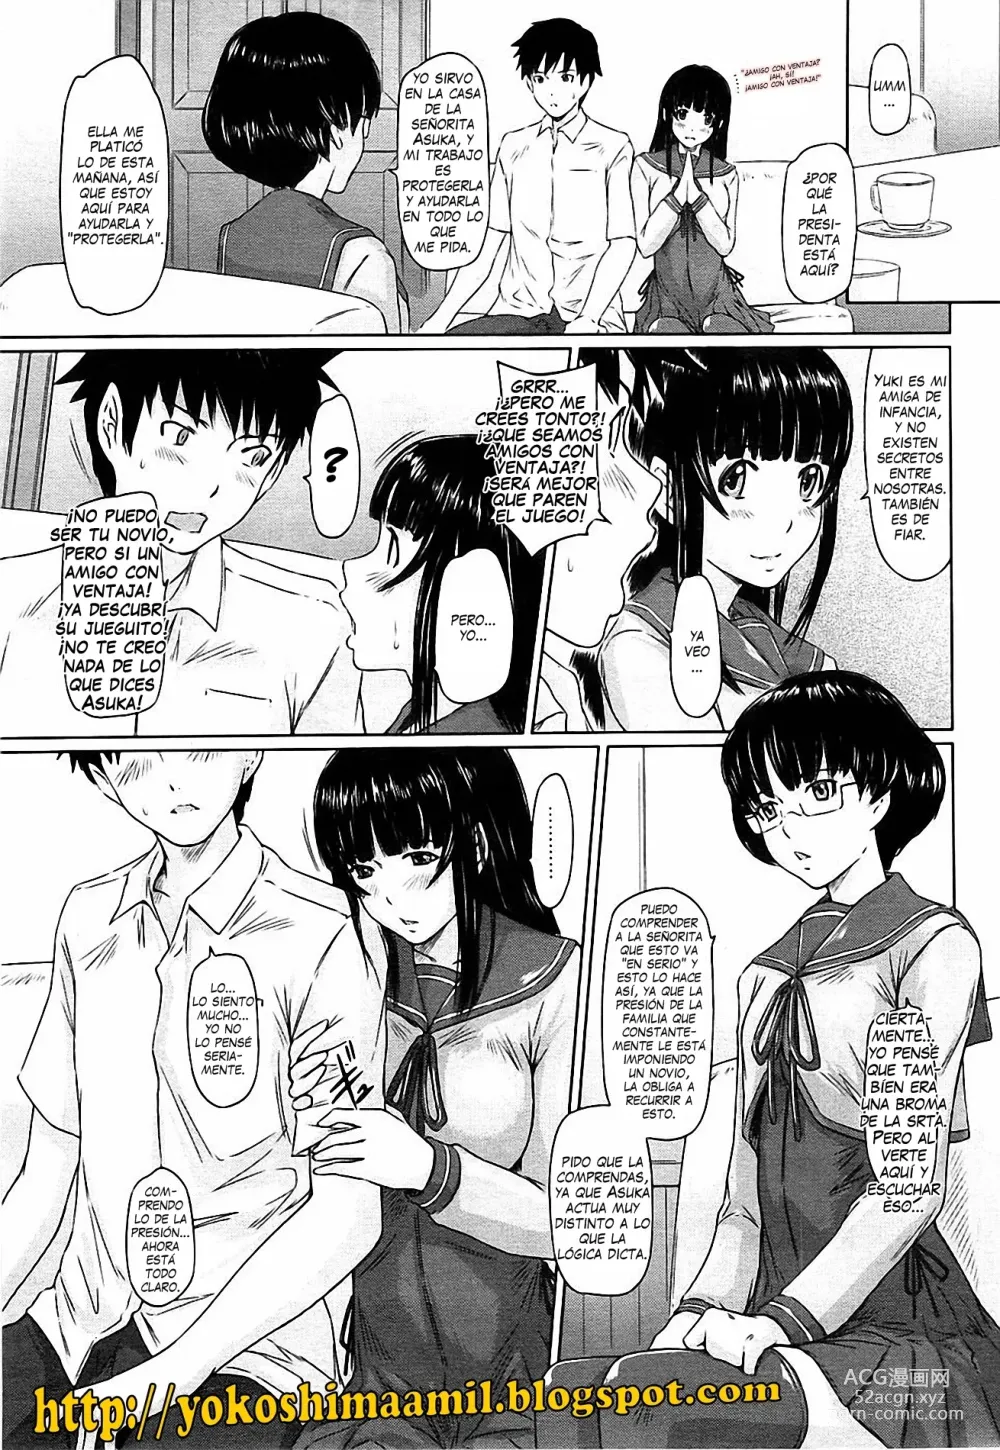 Page 7 of manga Curiosity Never Stops.